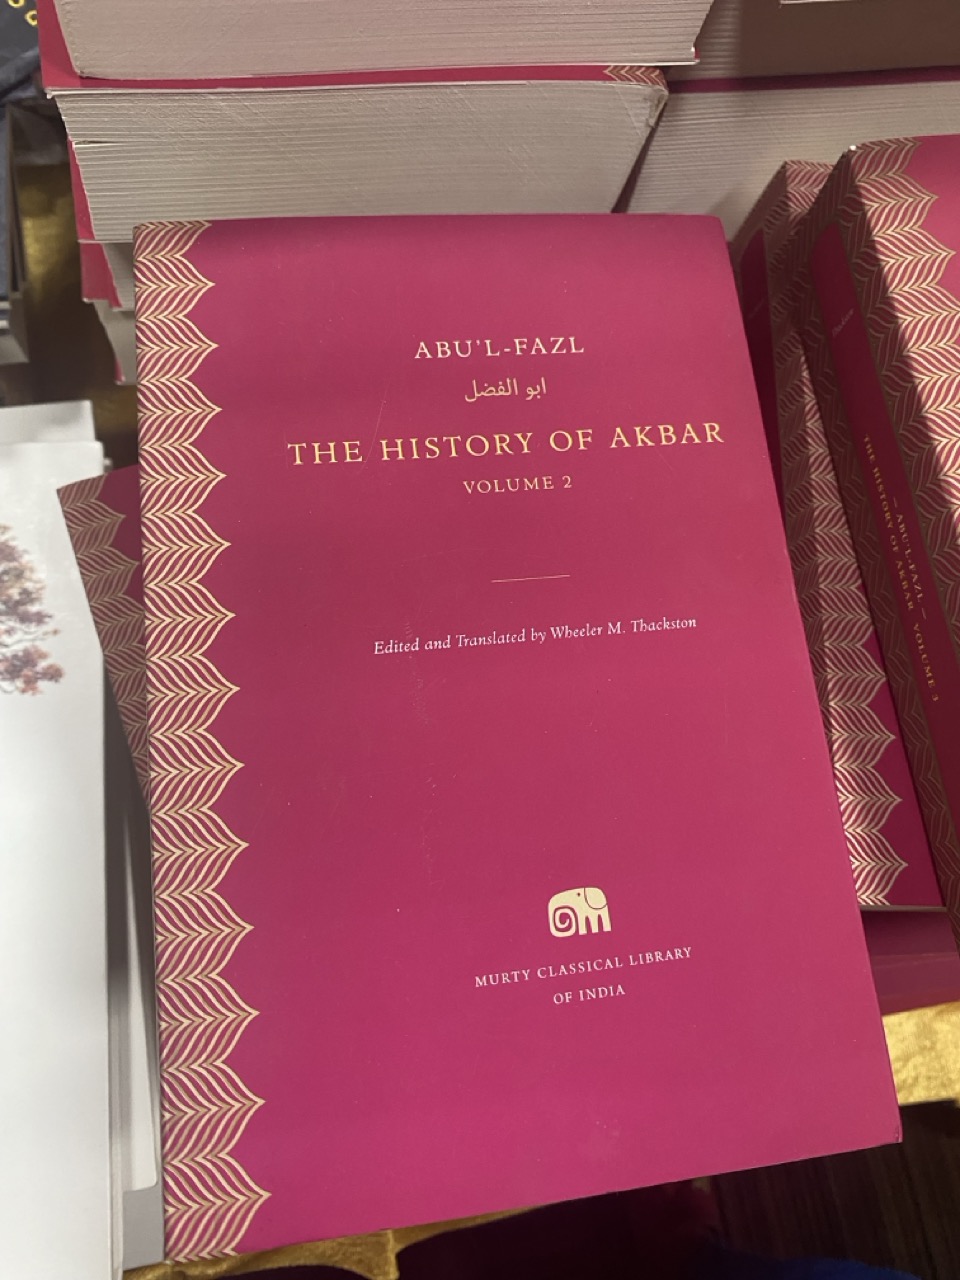 The  history of Akbar vol 2 by Murty Library.

I picked up 